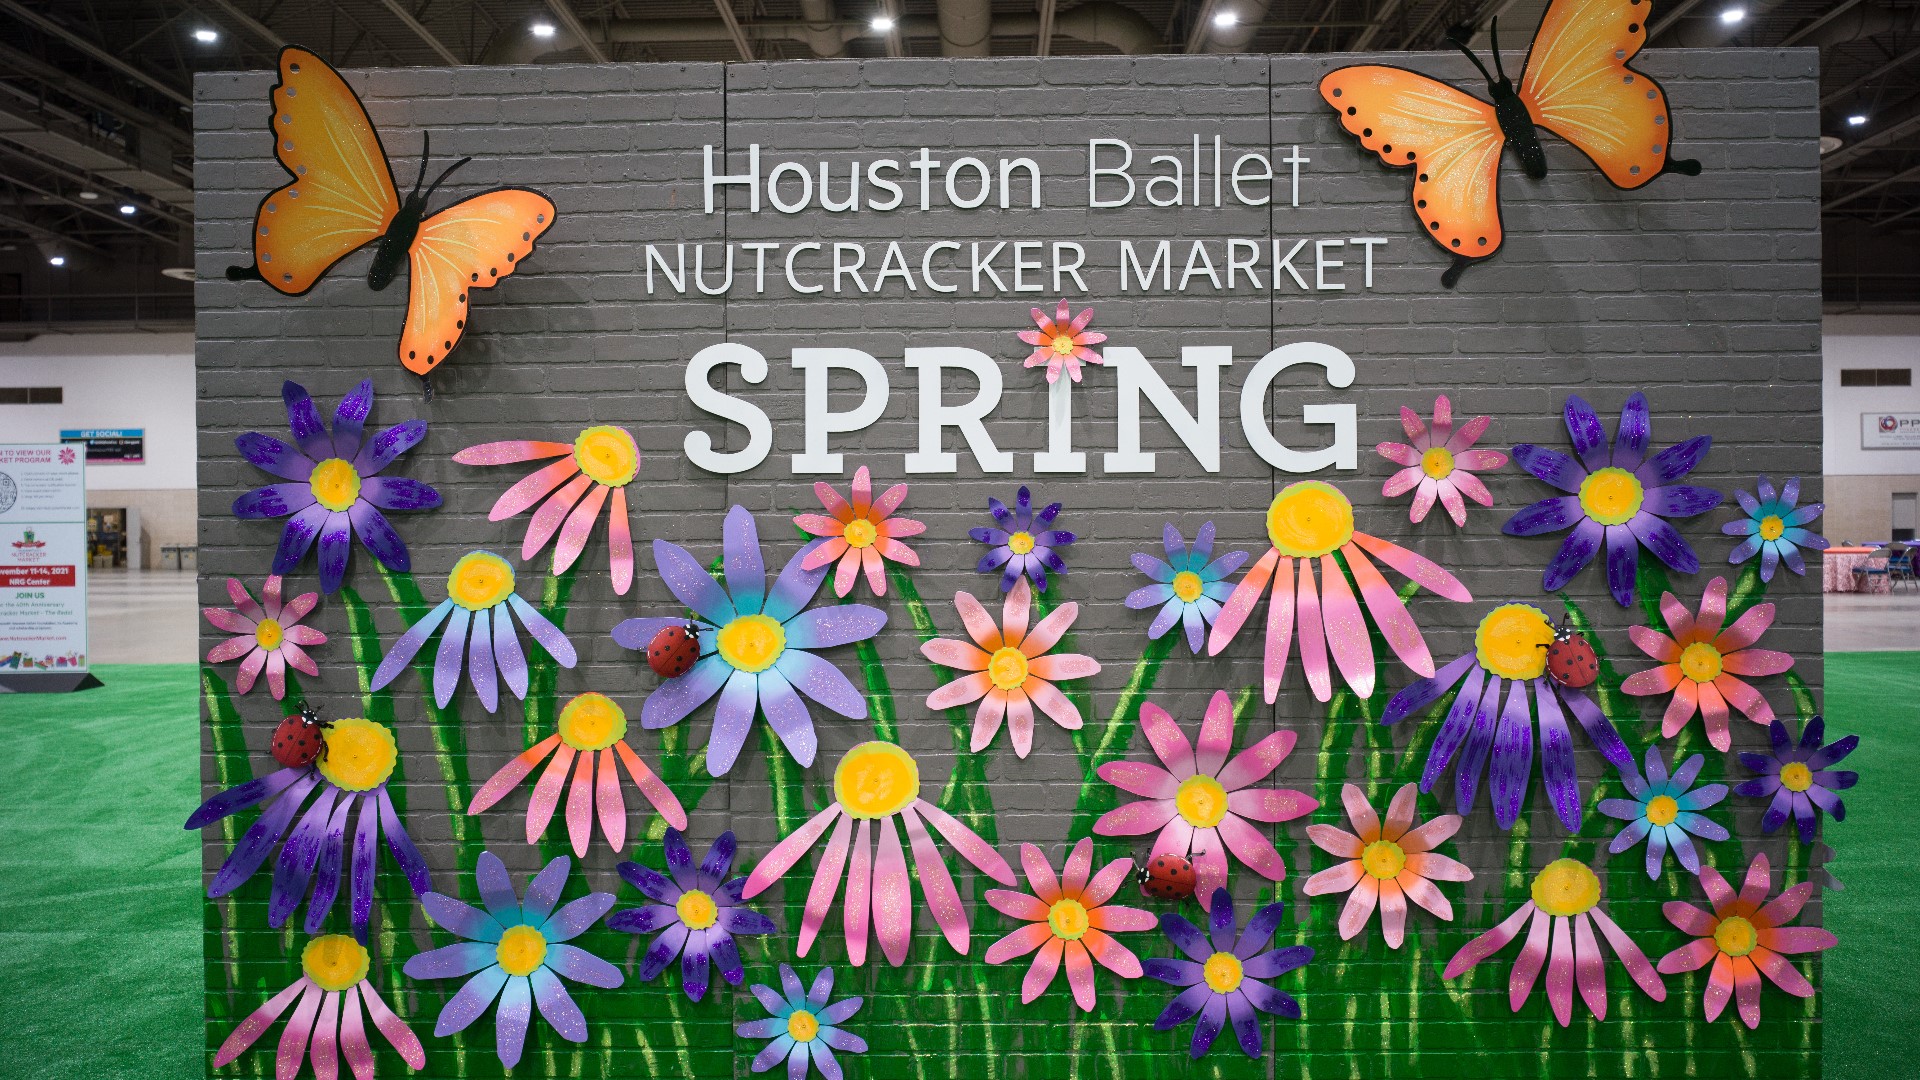 Around 150 merchants will have a variety of items for sale in April at NRG Center. Tickets for the market will be available in March.